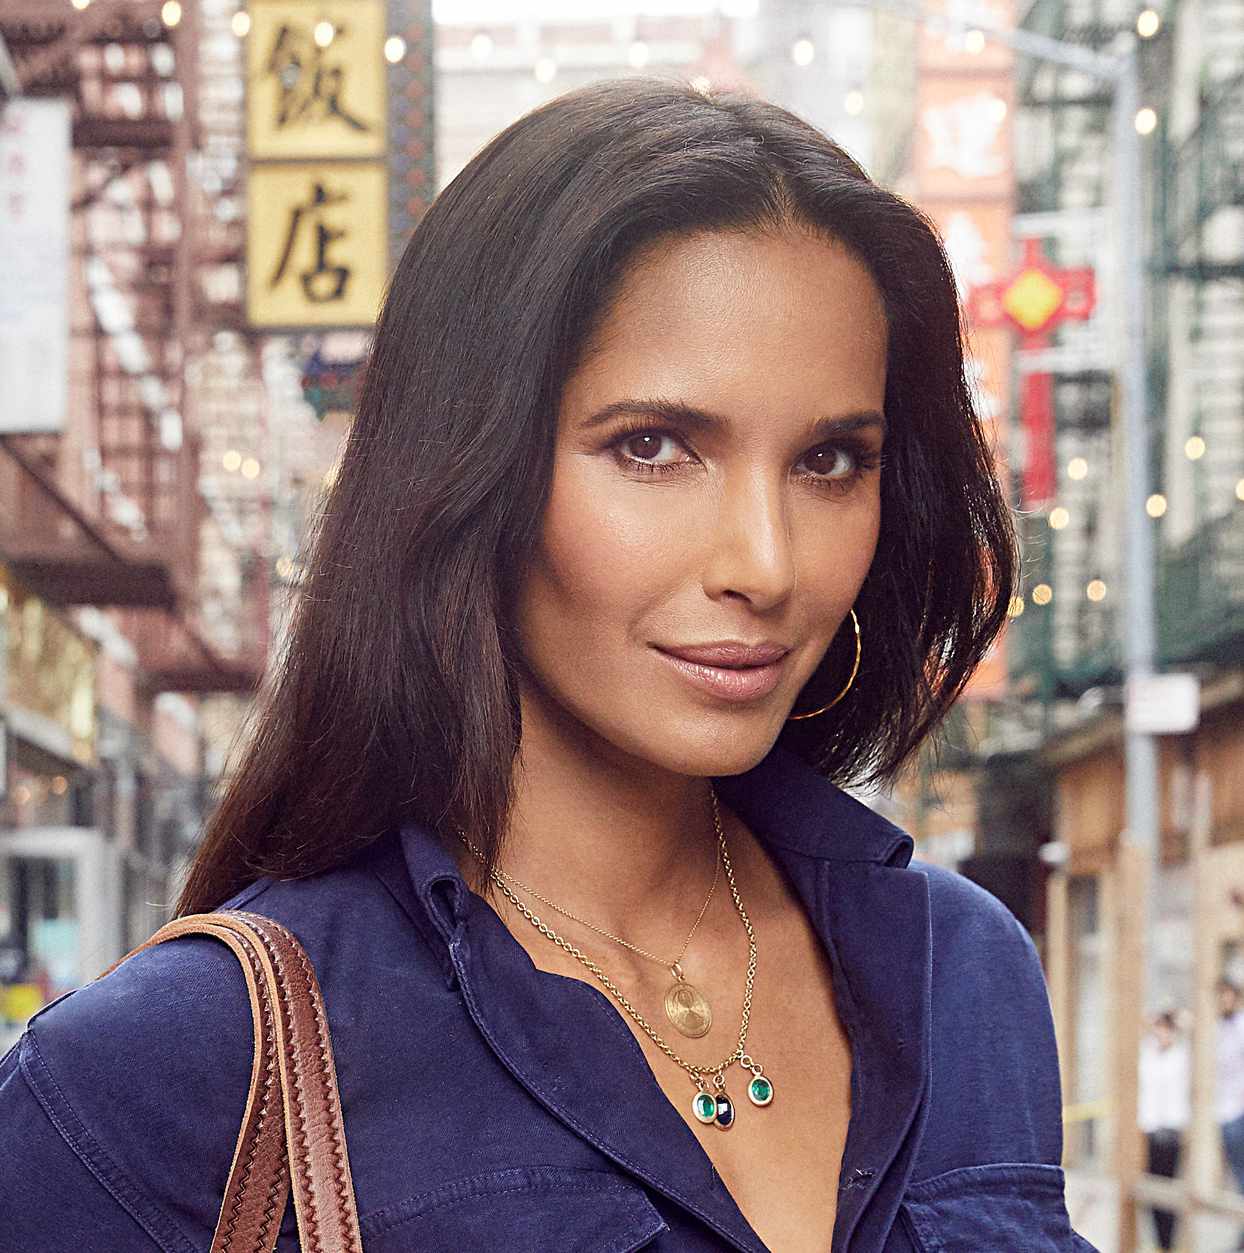 Padma Lakshmi On Her New Jewelry Line (And The Dos And Don'ts Of Bling!) | Glamour